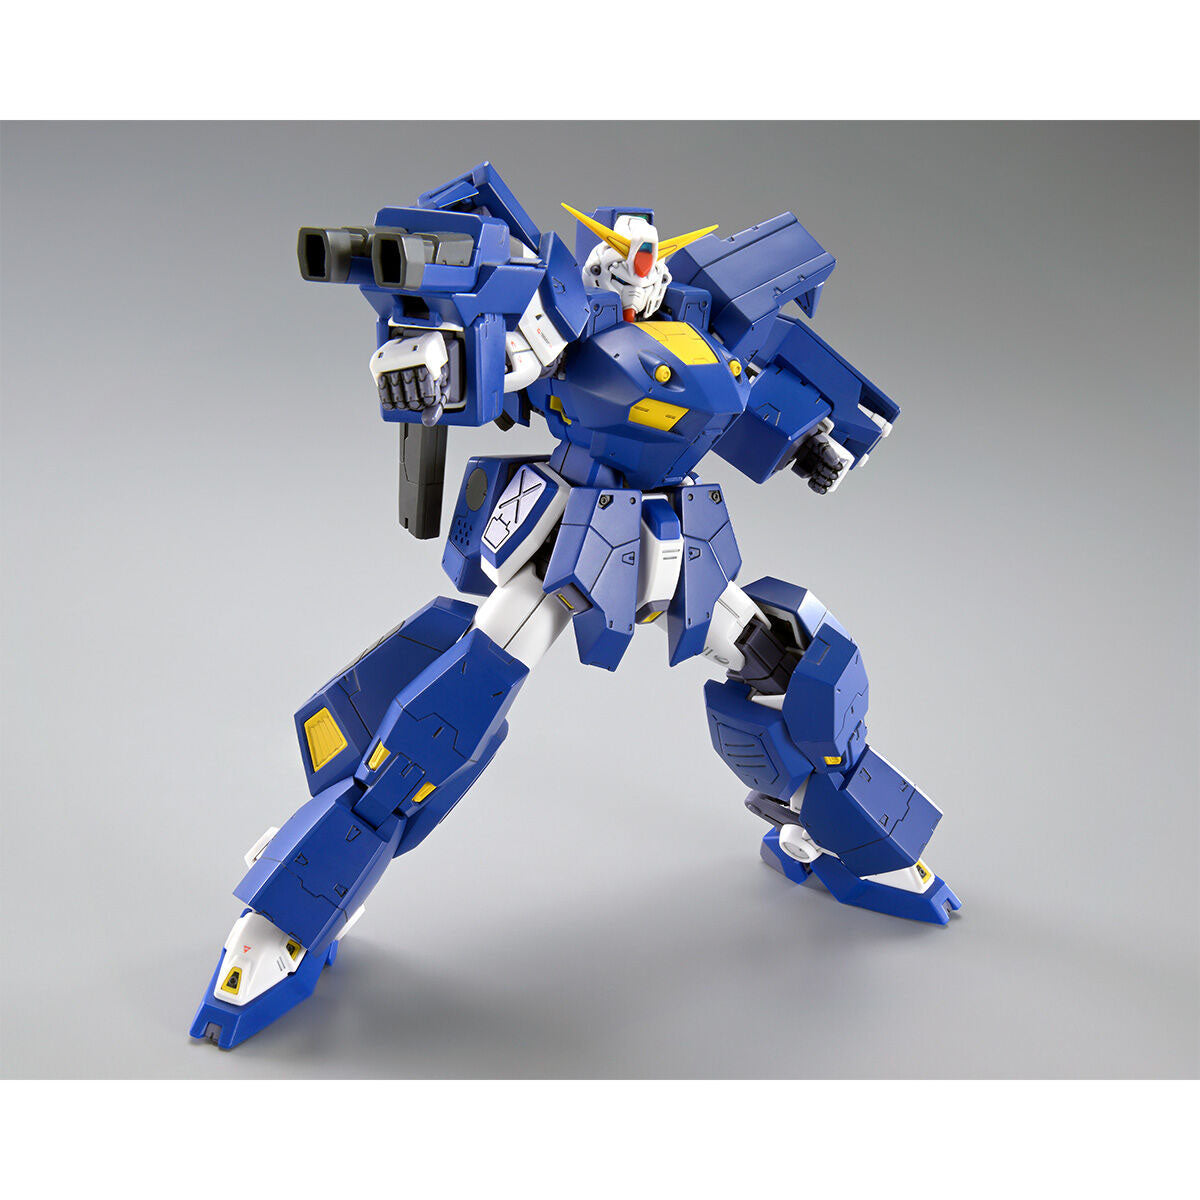 [IN STOCK in HK] MG 1/100 MISSION PACK J-TYPE & Q-TYPE for GUNDAM F90